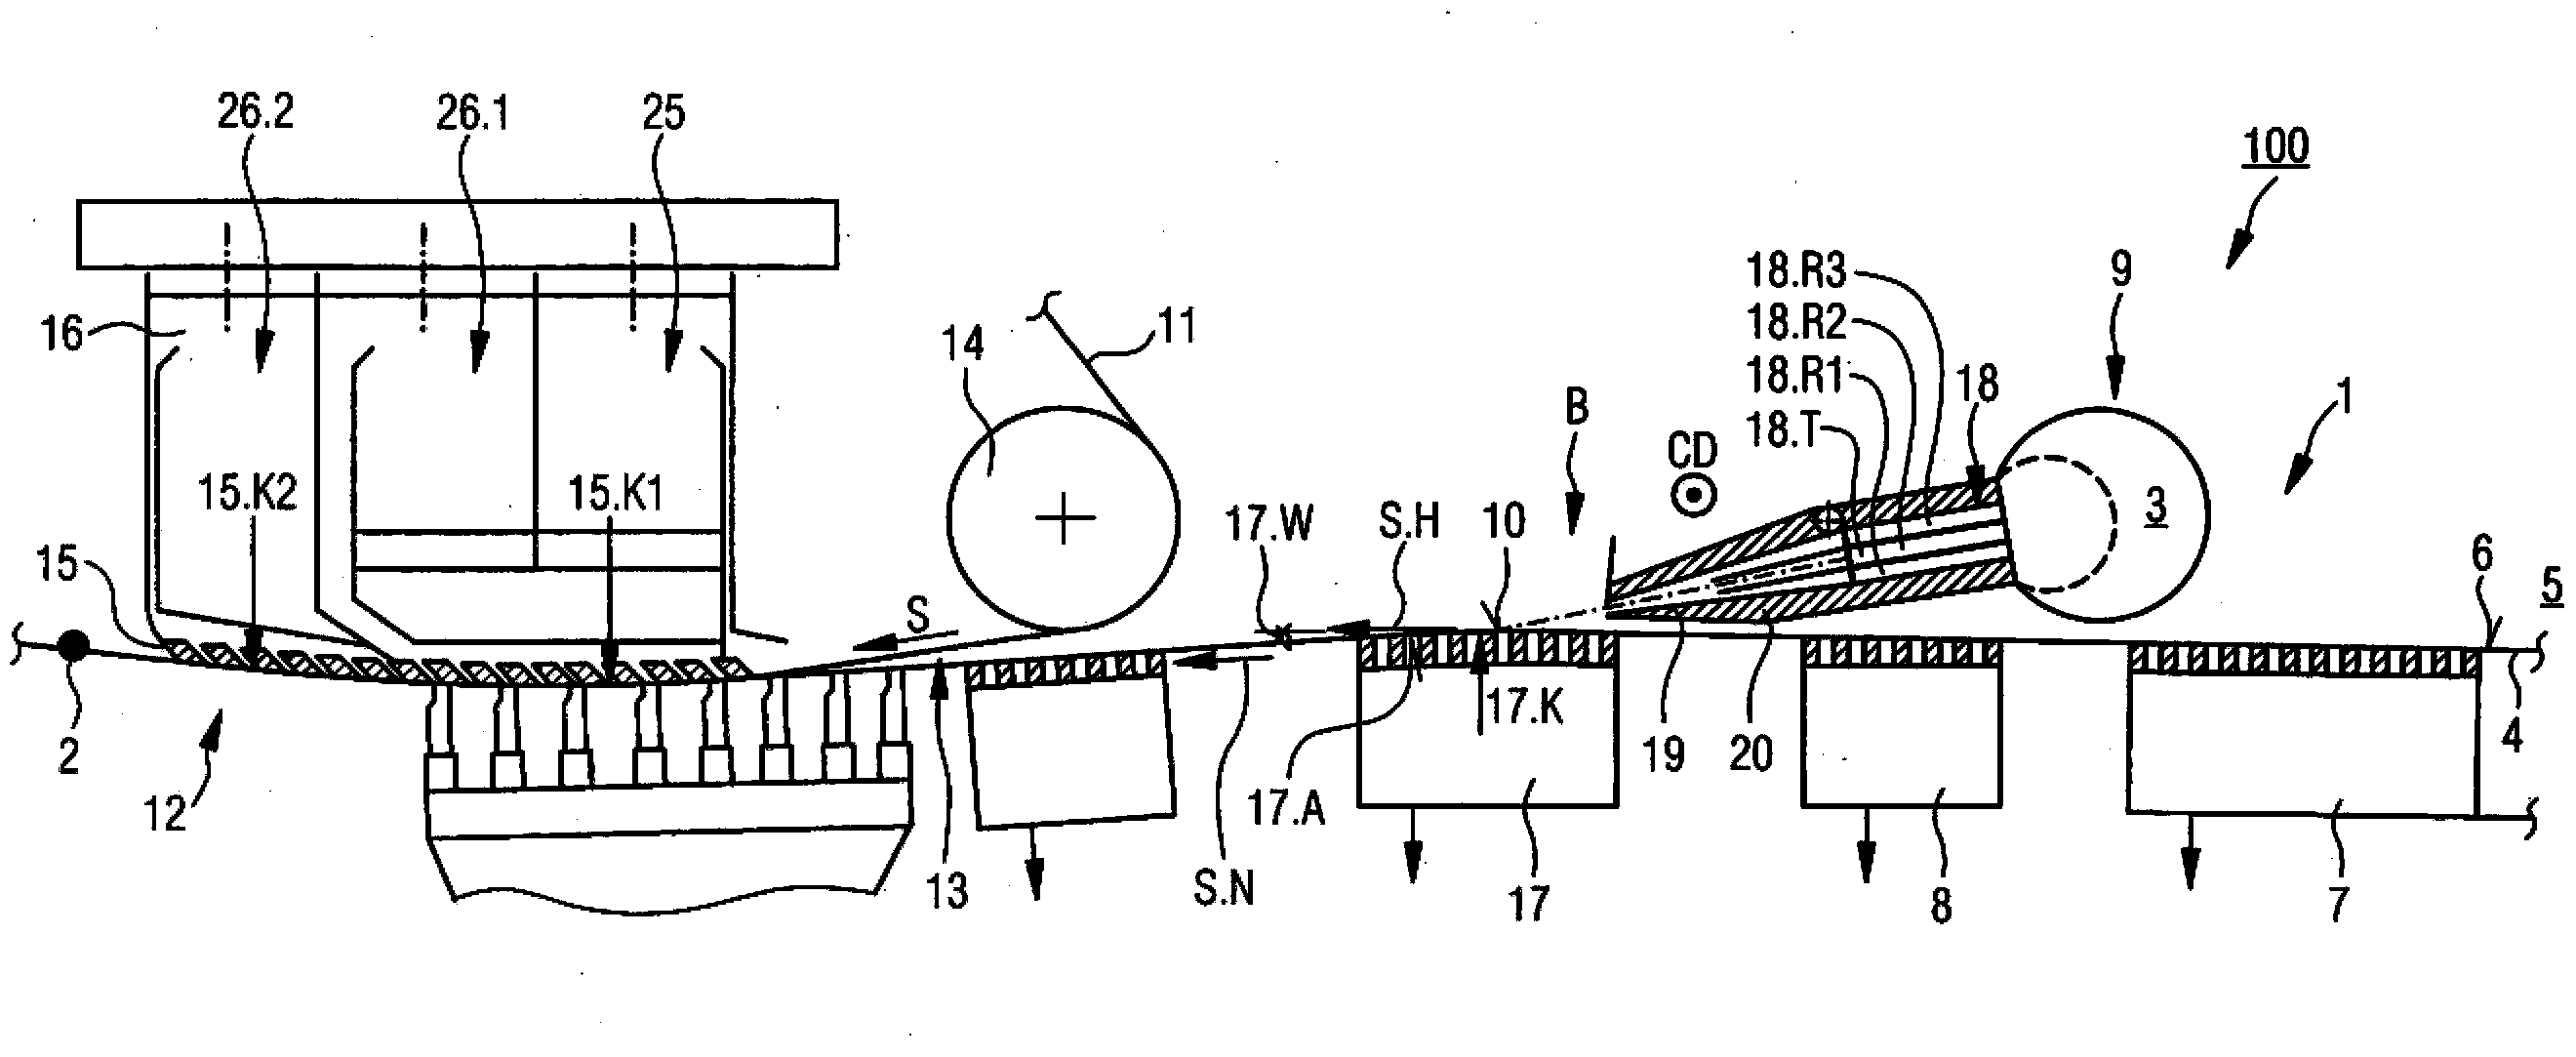 Sheet-forming device